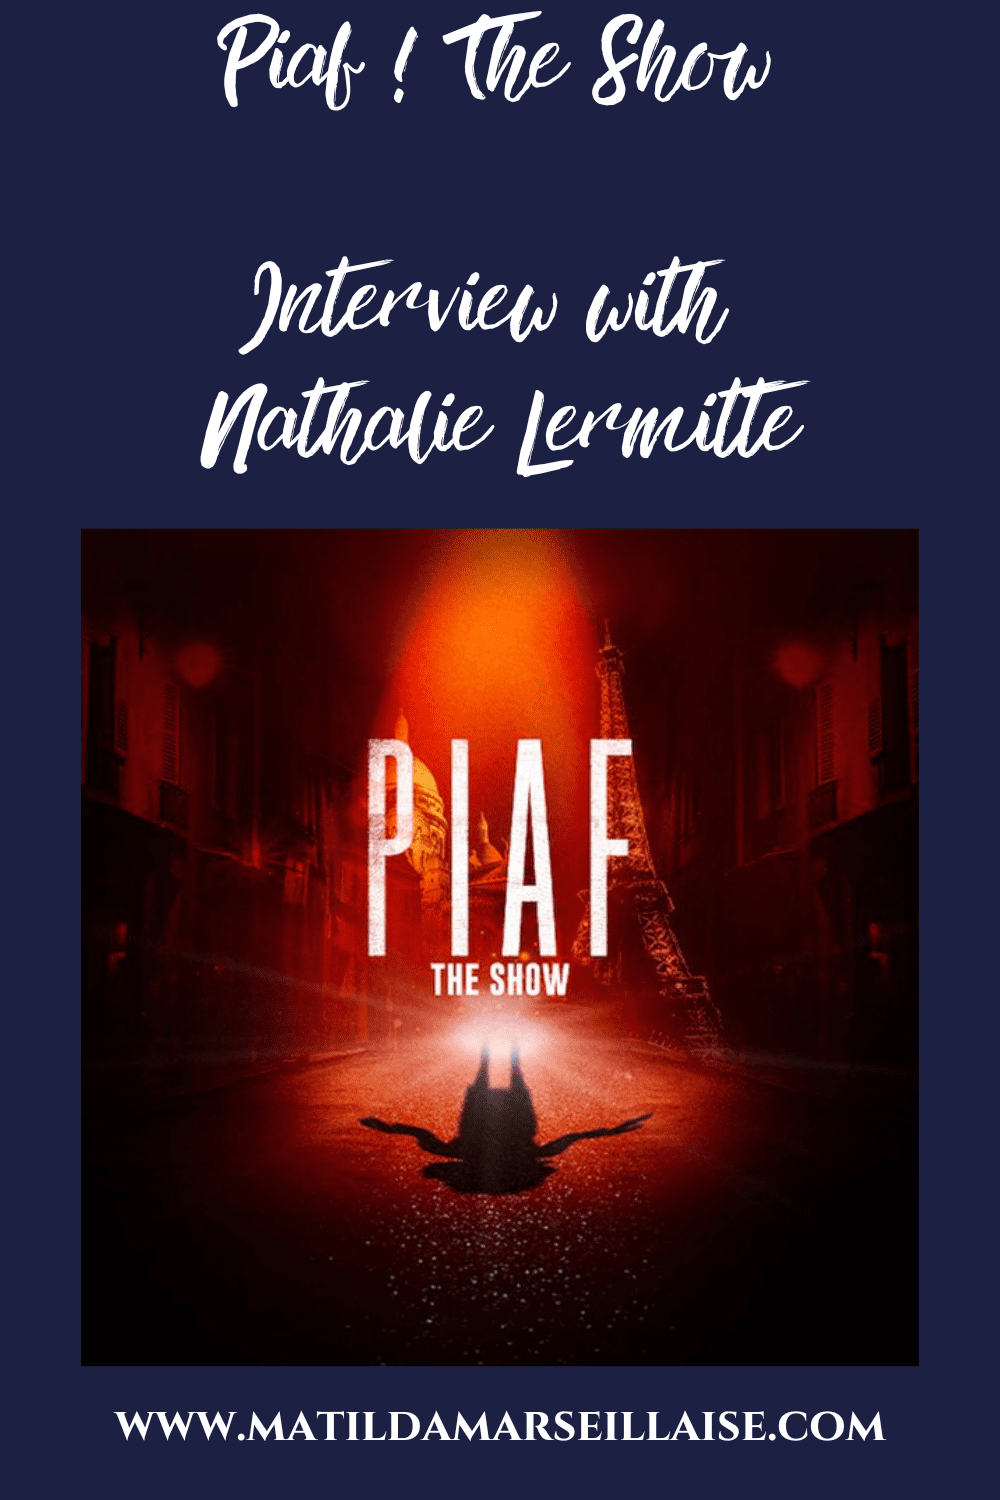 Nathalie Lermitte, Piaf’s musical heir is coming to Australia for Piaf! The Show